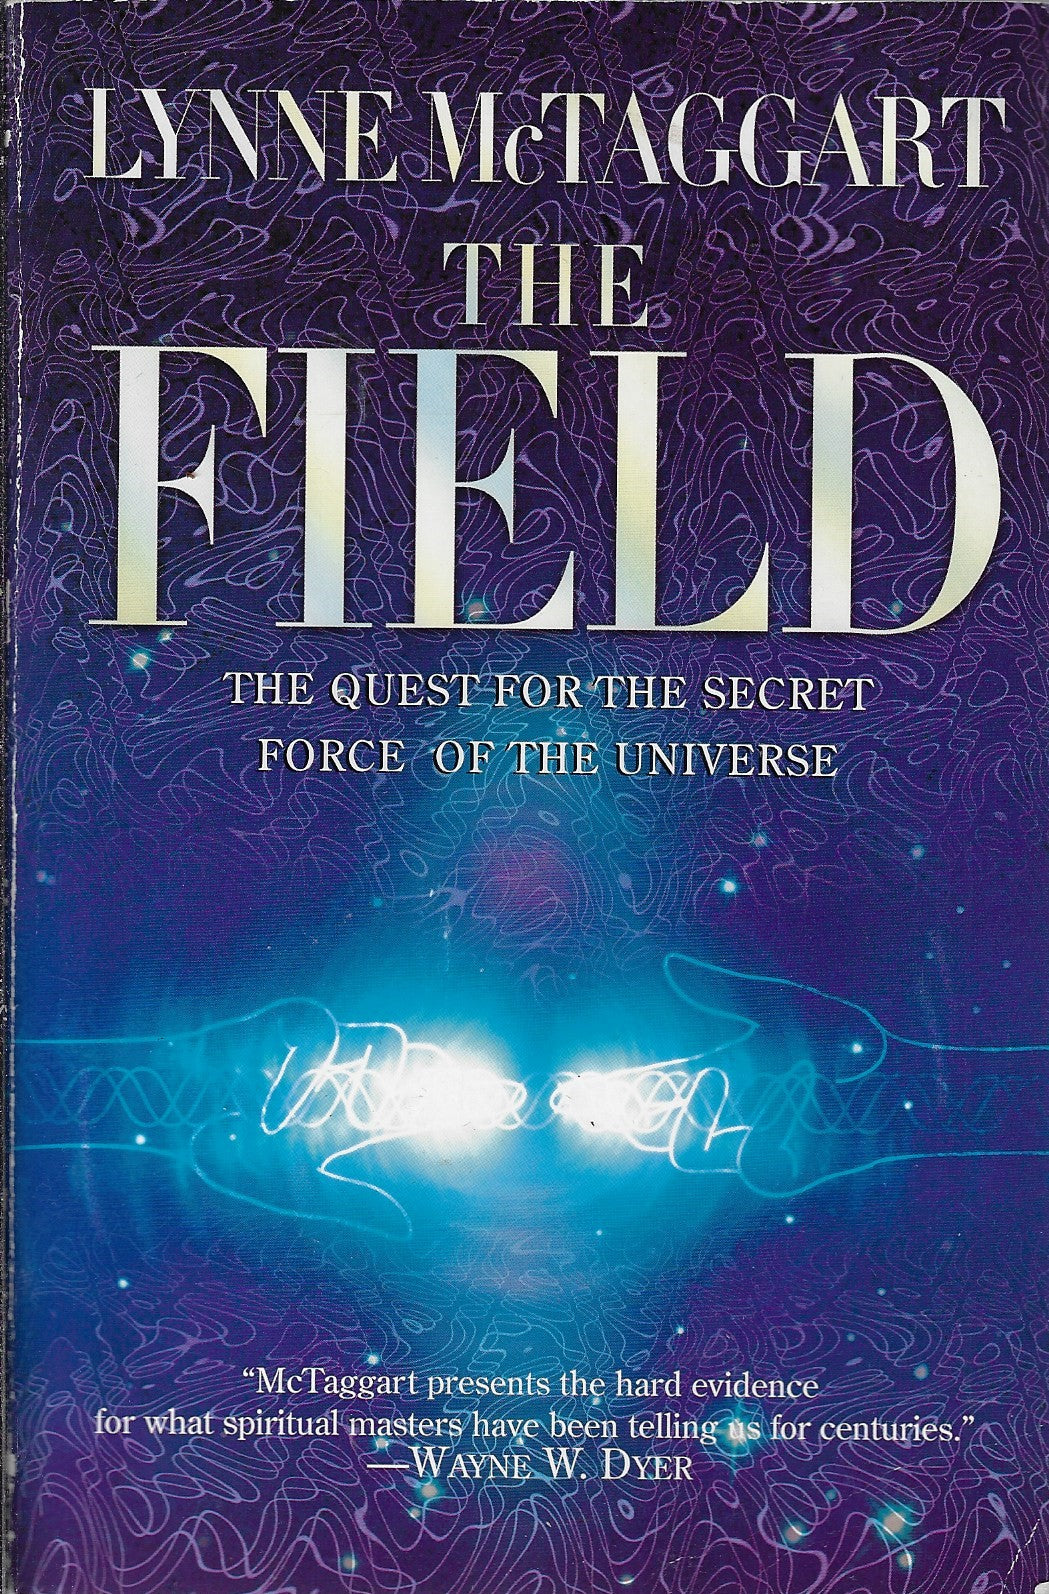 The Field / The quest for the secret force of the universe